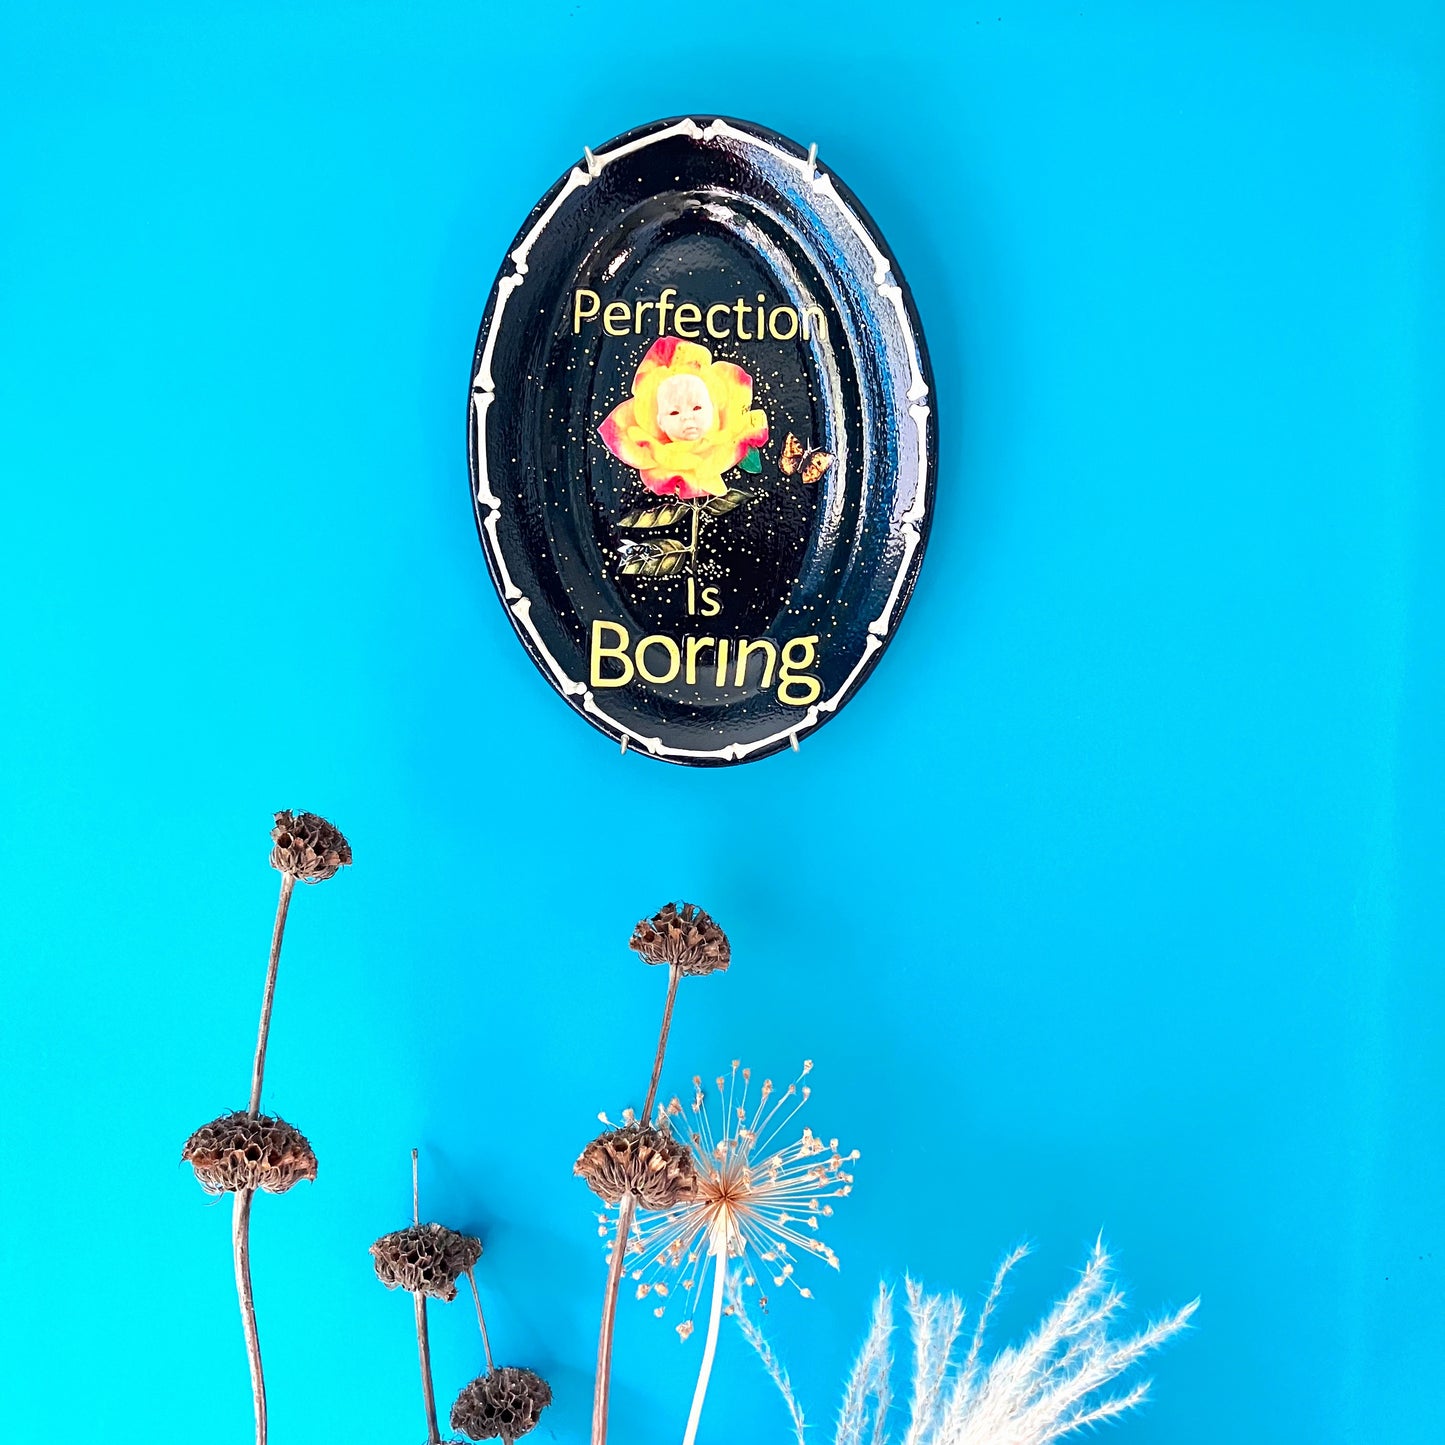 "Perfection Is Boring" Upcycled Wall Plate by House of Frisson, featuring a collage of a yellow rose with a doll face, a moth, and House of Frisson's fly, in a frame of bones. Plate hanging on a blue wall.